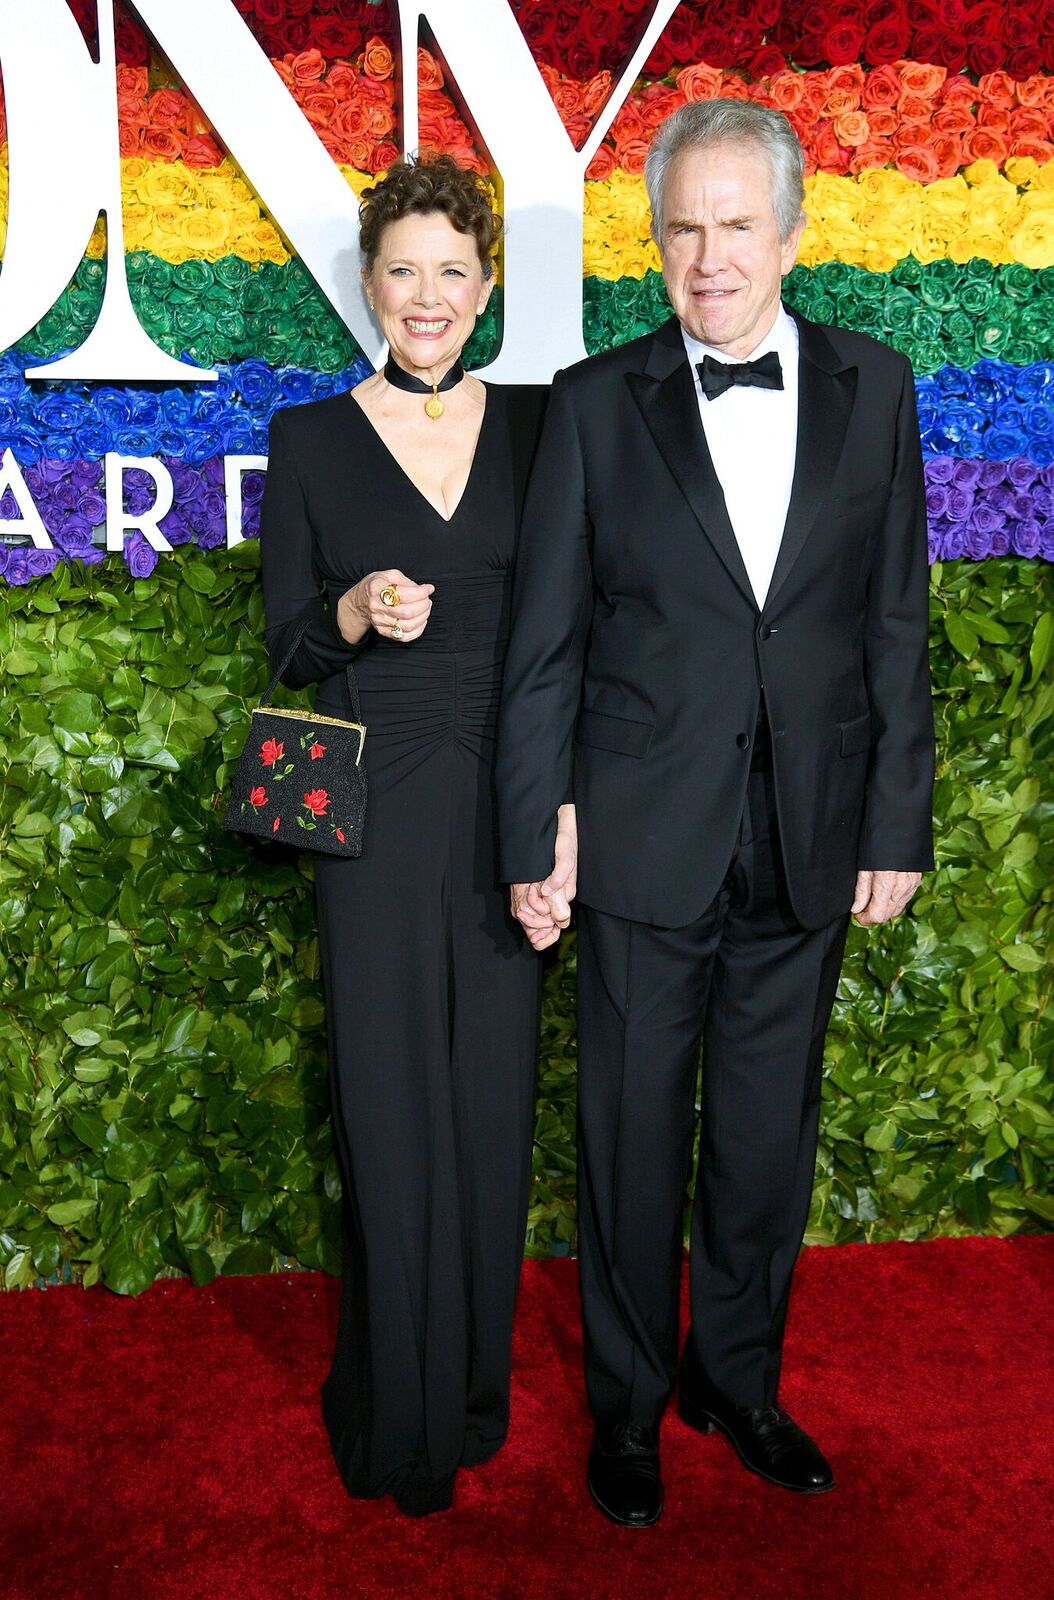 Annette Bening and Warren Beatty attends the 73rd Annual Tony Awards at Radio City Music Hall on June 09, 2019 in New York City | Photo: Getty Images